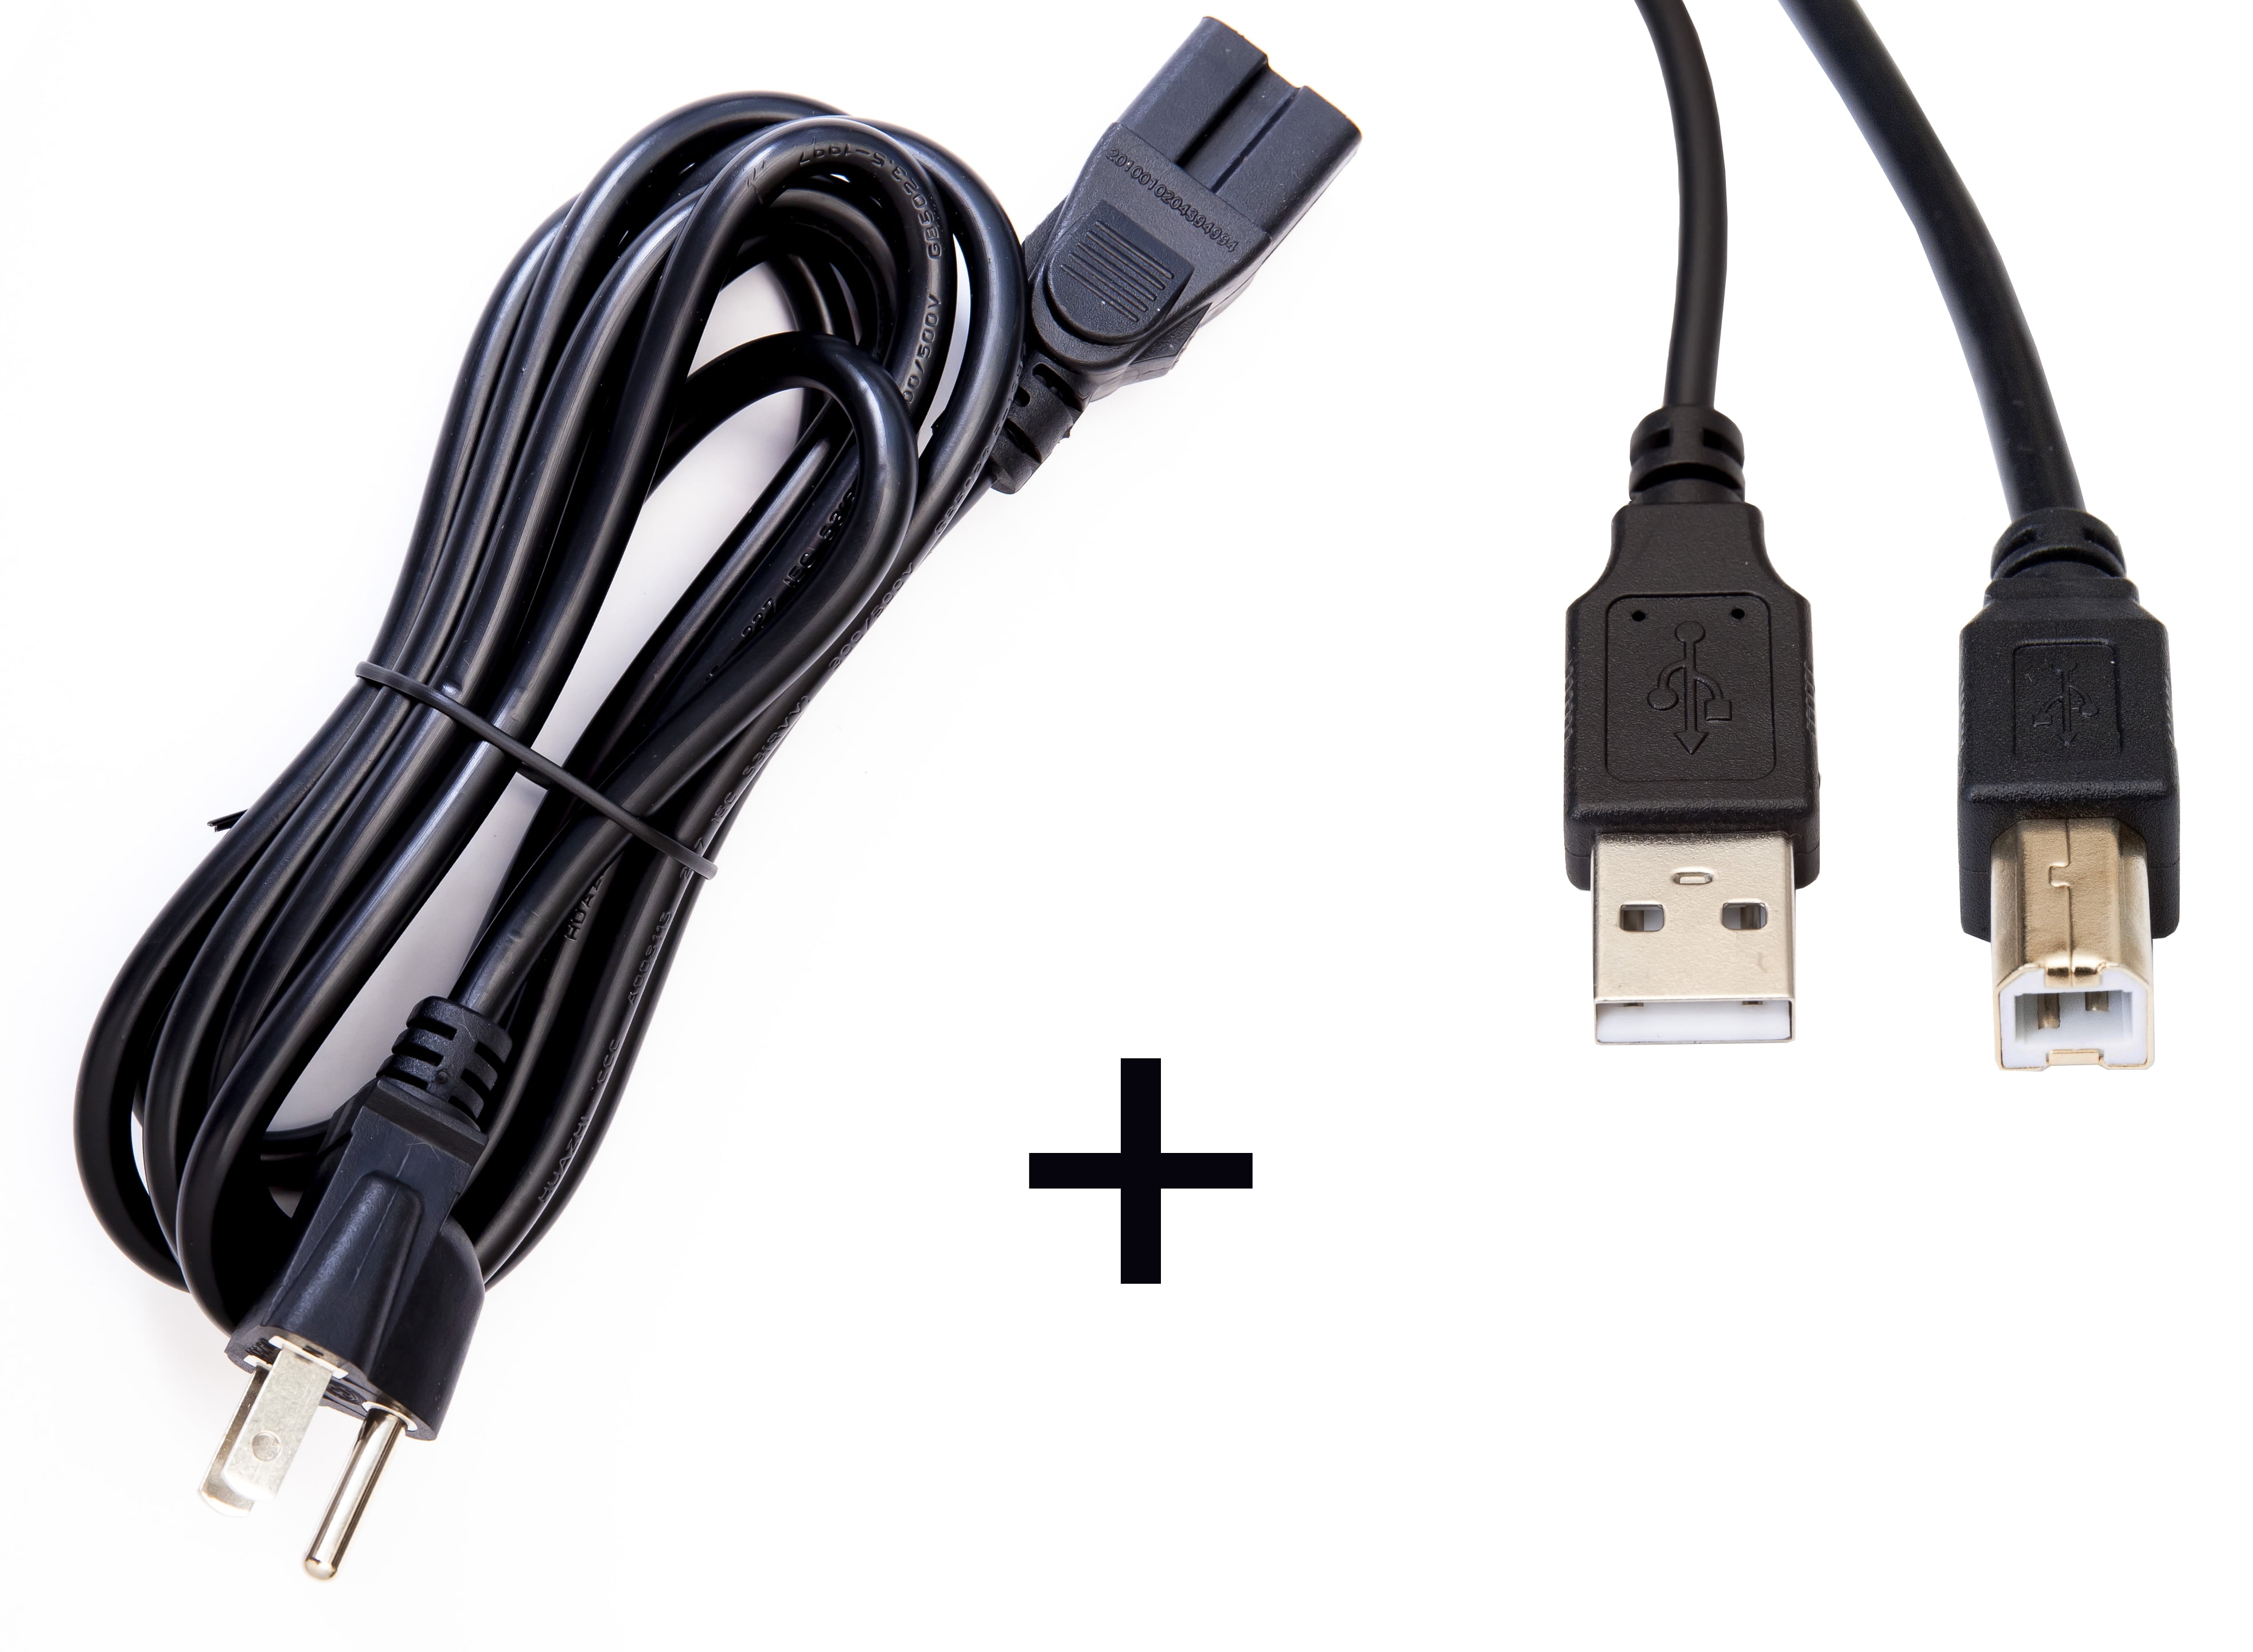 OMNIHIL 15 Feet Long High Speed USB 2.0 Cable Compatible with Canon PIXMA IP2600 